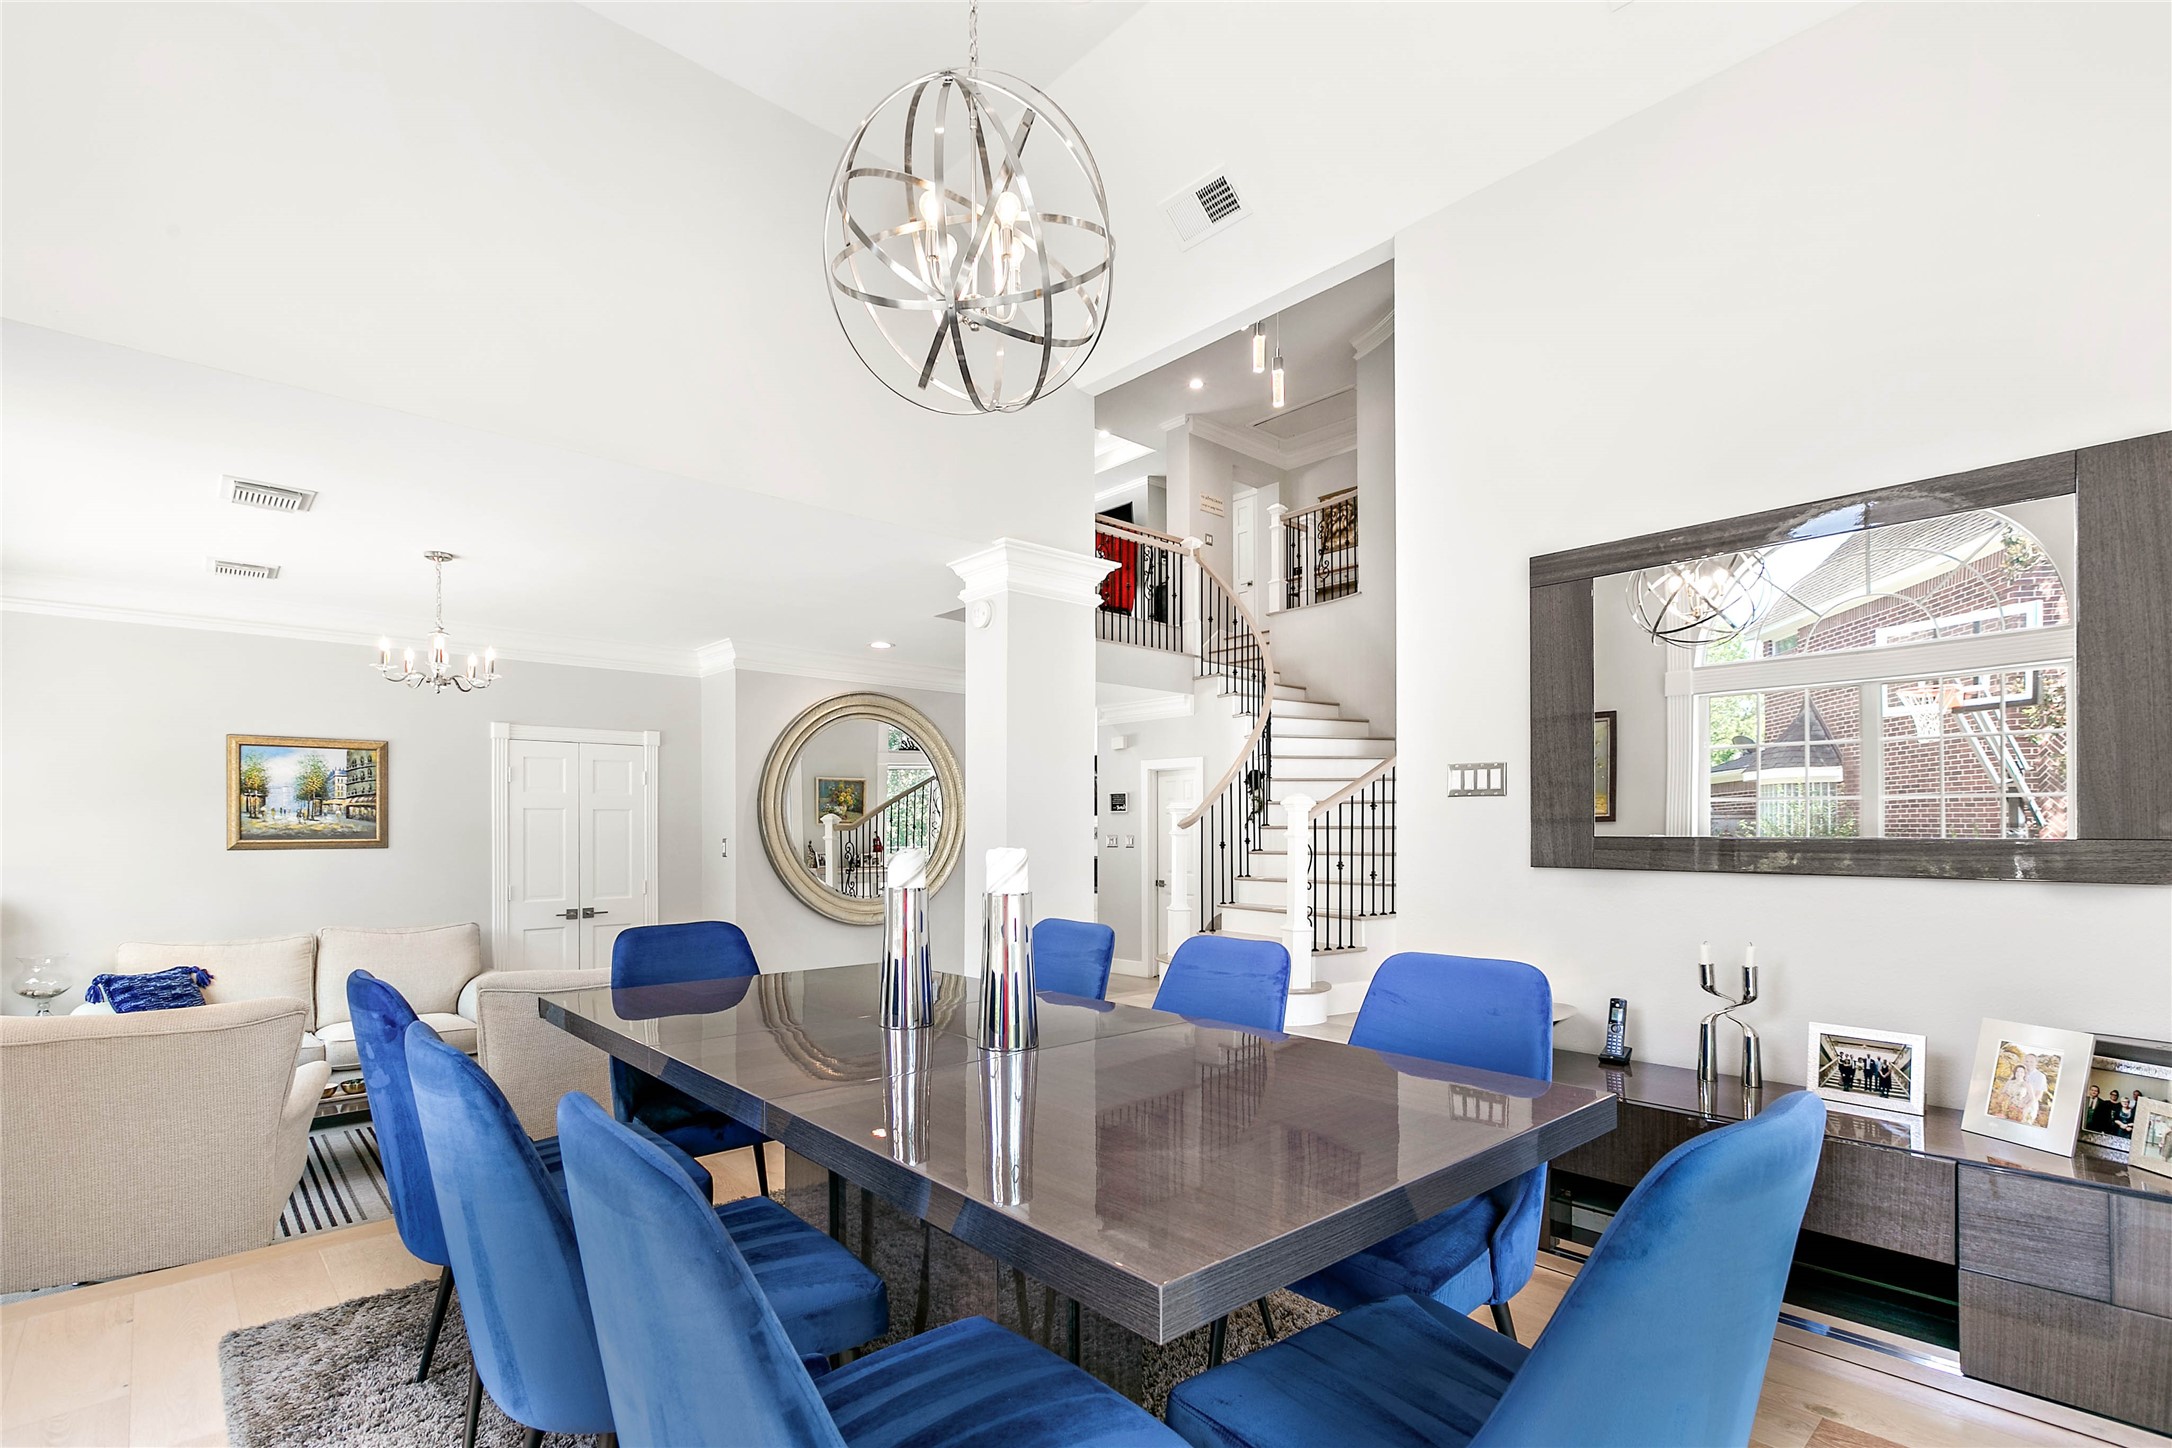 Make lasting memories during special occasions in this stunning formal dining room adjacent to the kitchen!